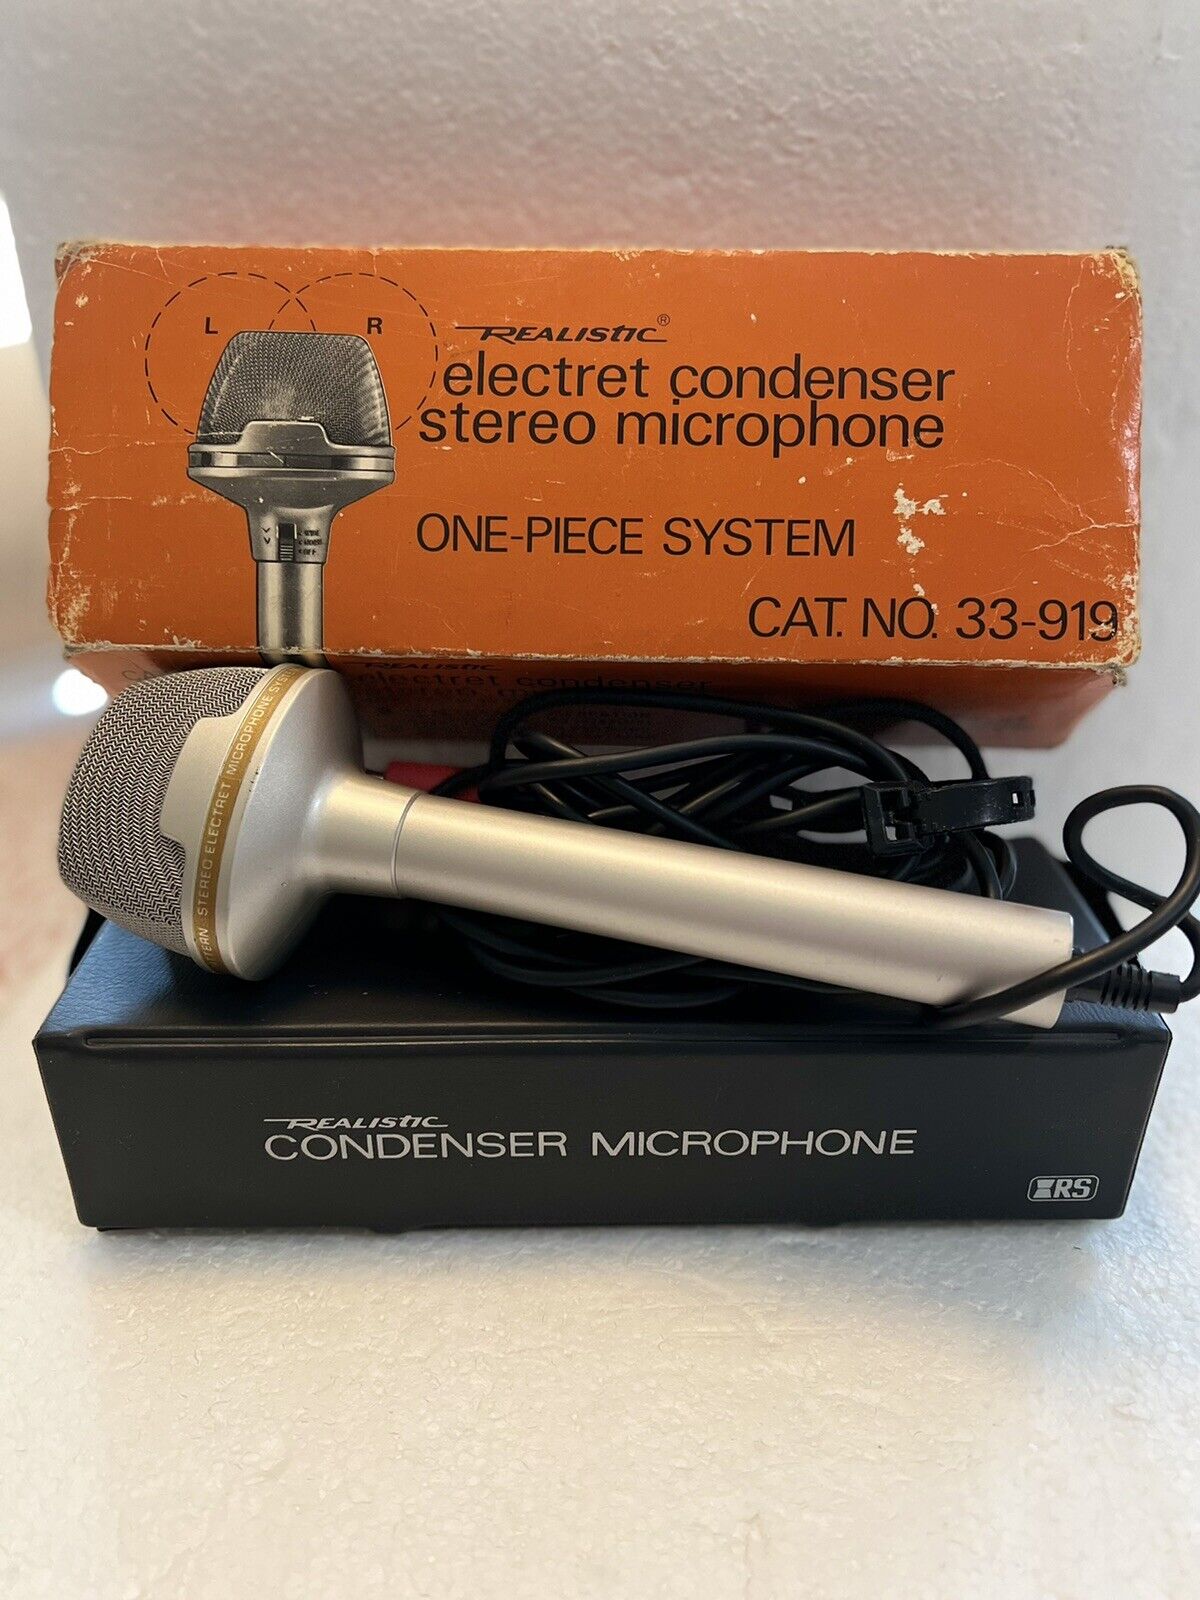 Realistic Electrat Consenser Stereo Microphone Untested 33-919